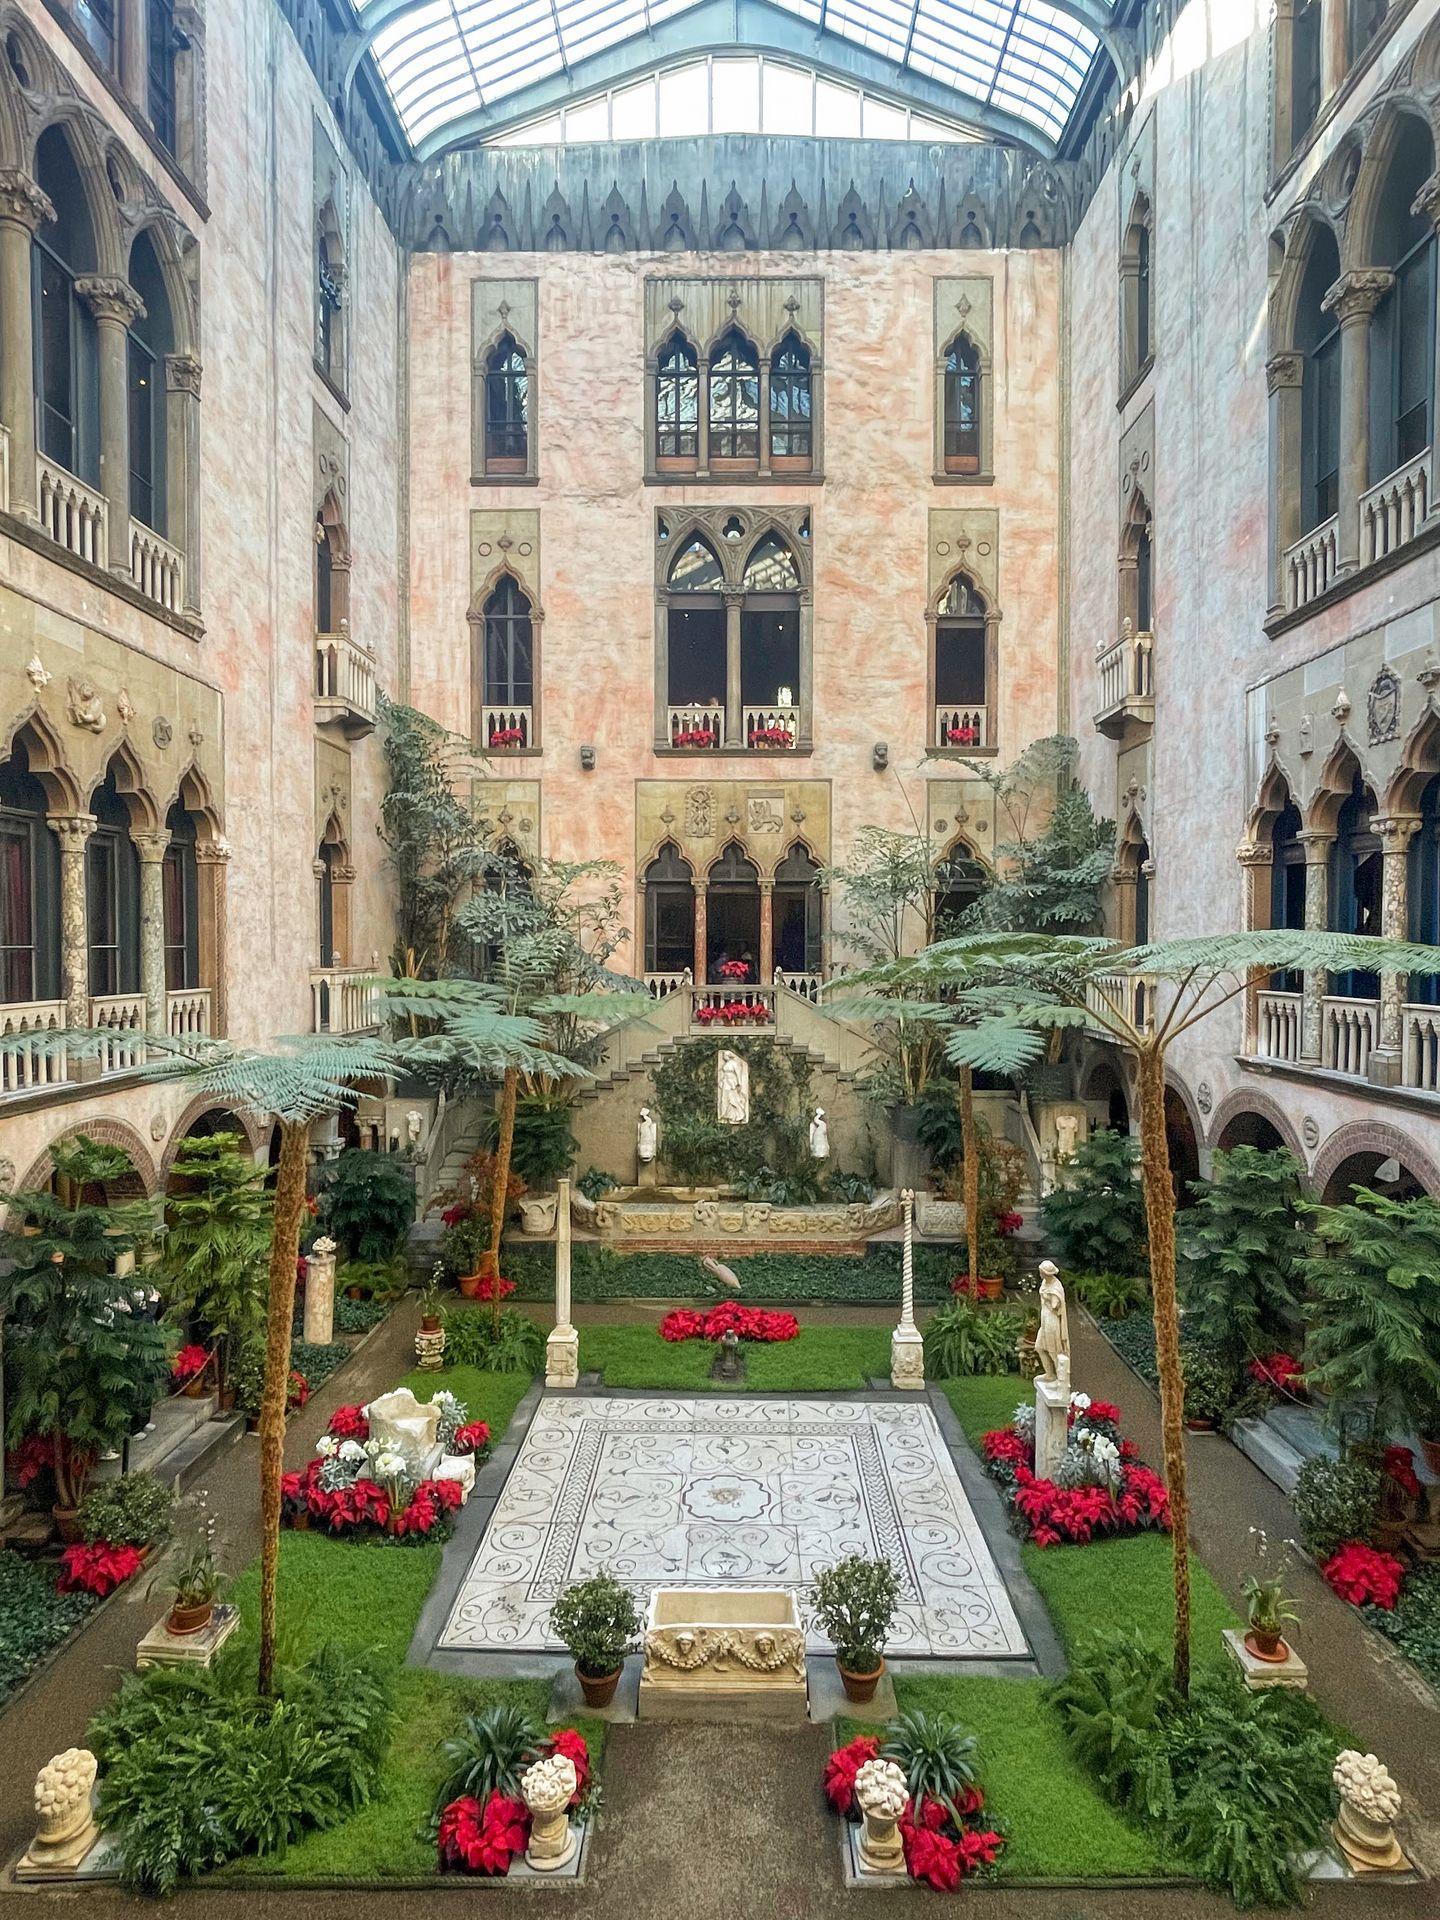 The courtyard in the center of the Gardner Museum. Several stories of the building surround the courtyard. There is a tile floor in the center of the ground that is surrounded by plants. There are red flowers and greenery.